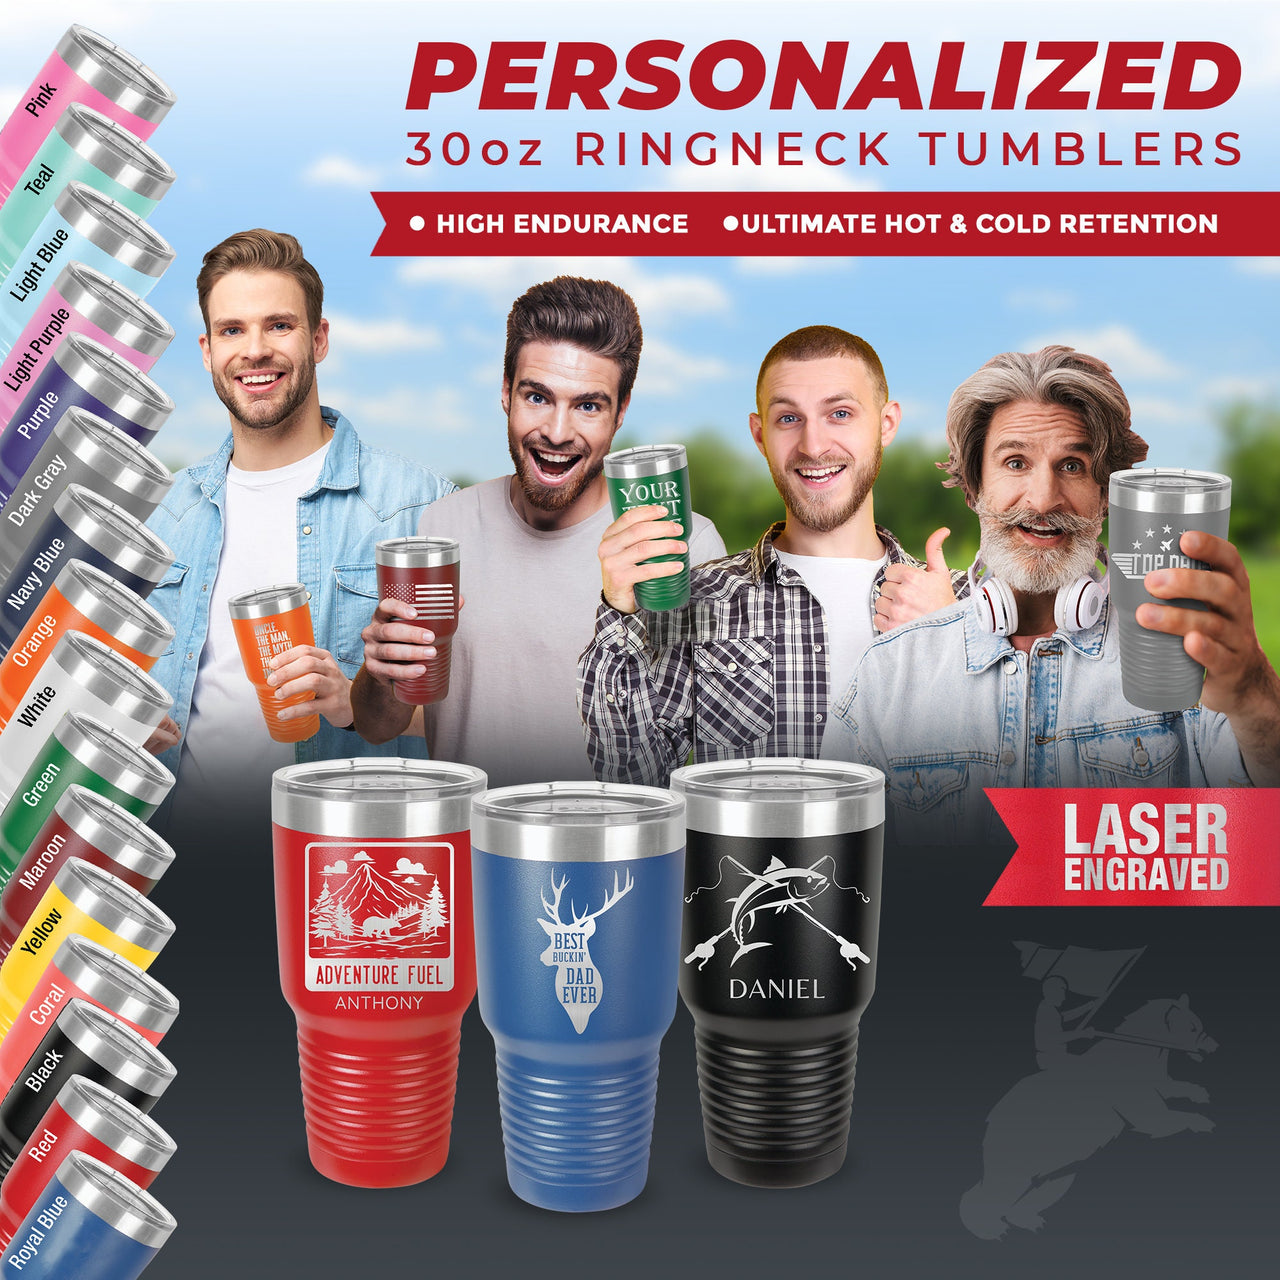 Limited Edition Mostly Original Parts Custom Tumbler Gifts | Tumbler Ideas For Guys | Engraved Tumblers | Mens Tumbler Ideas | Dad Tumbler